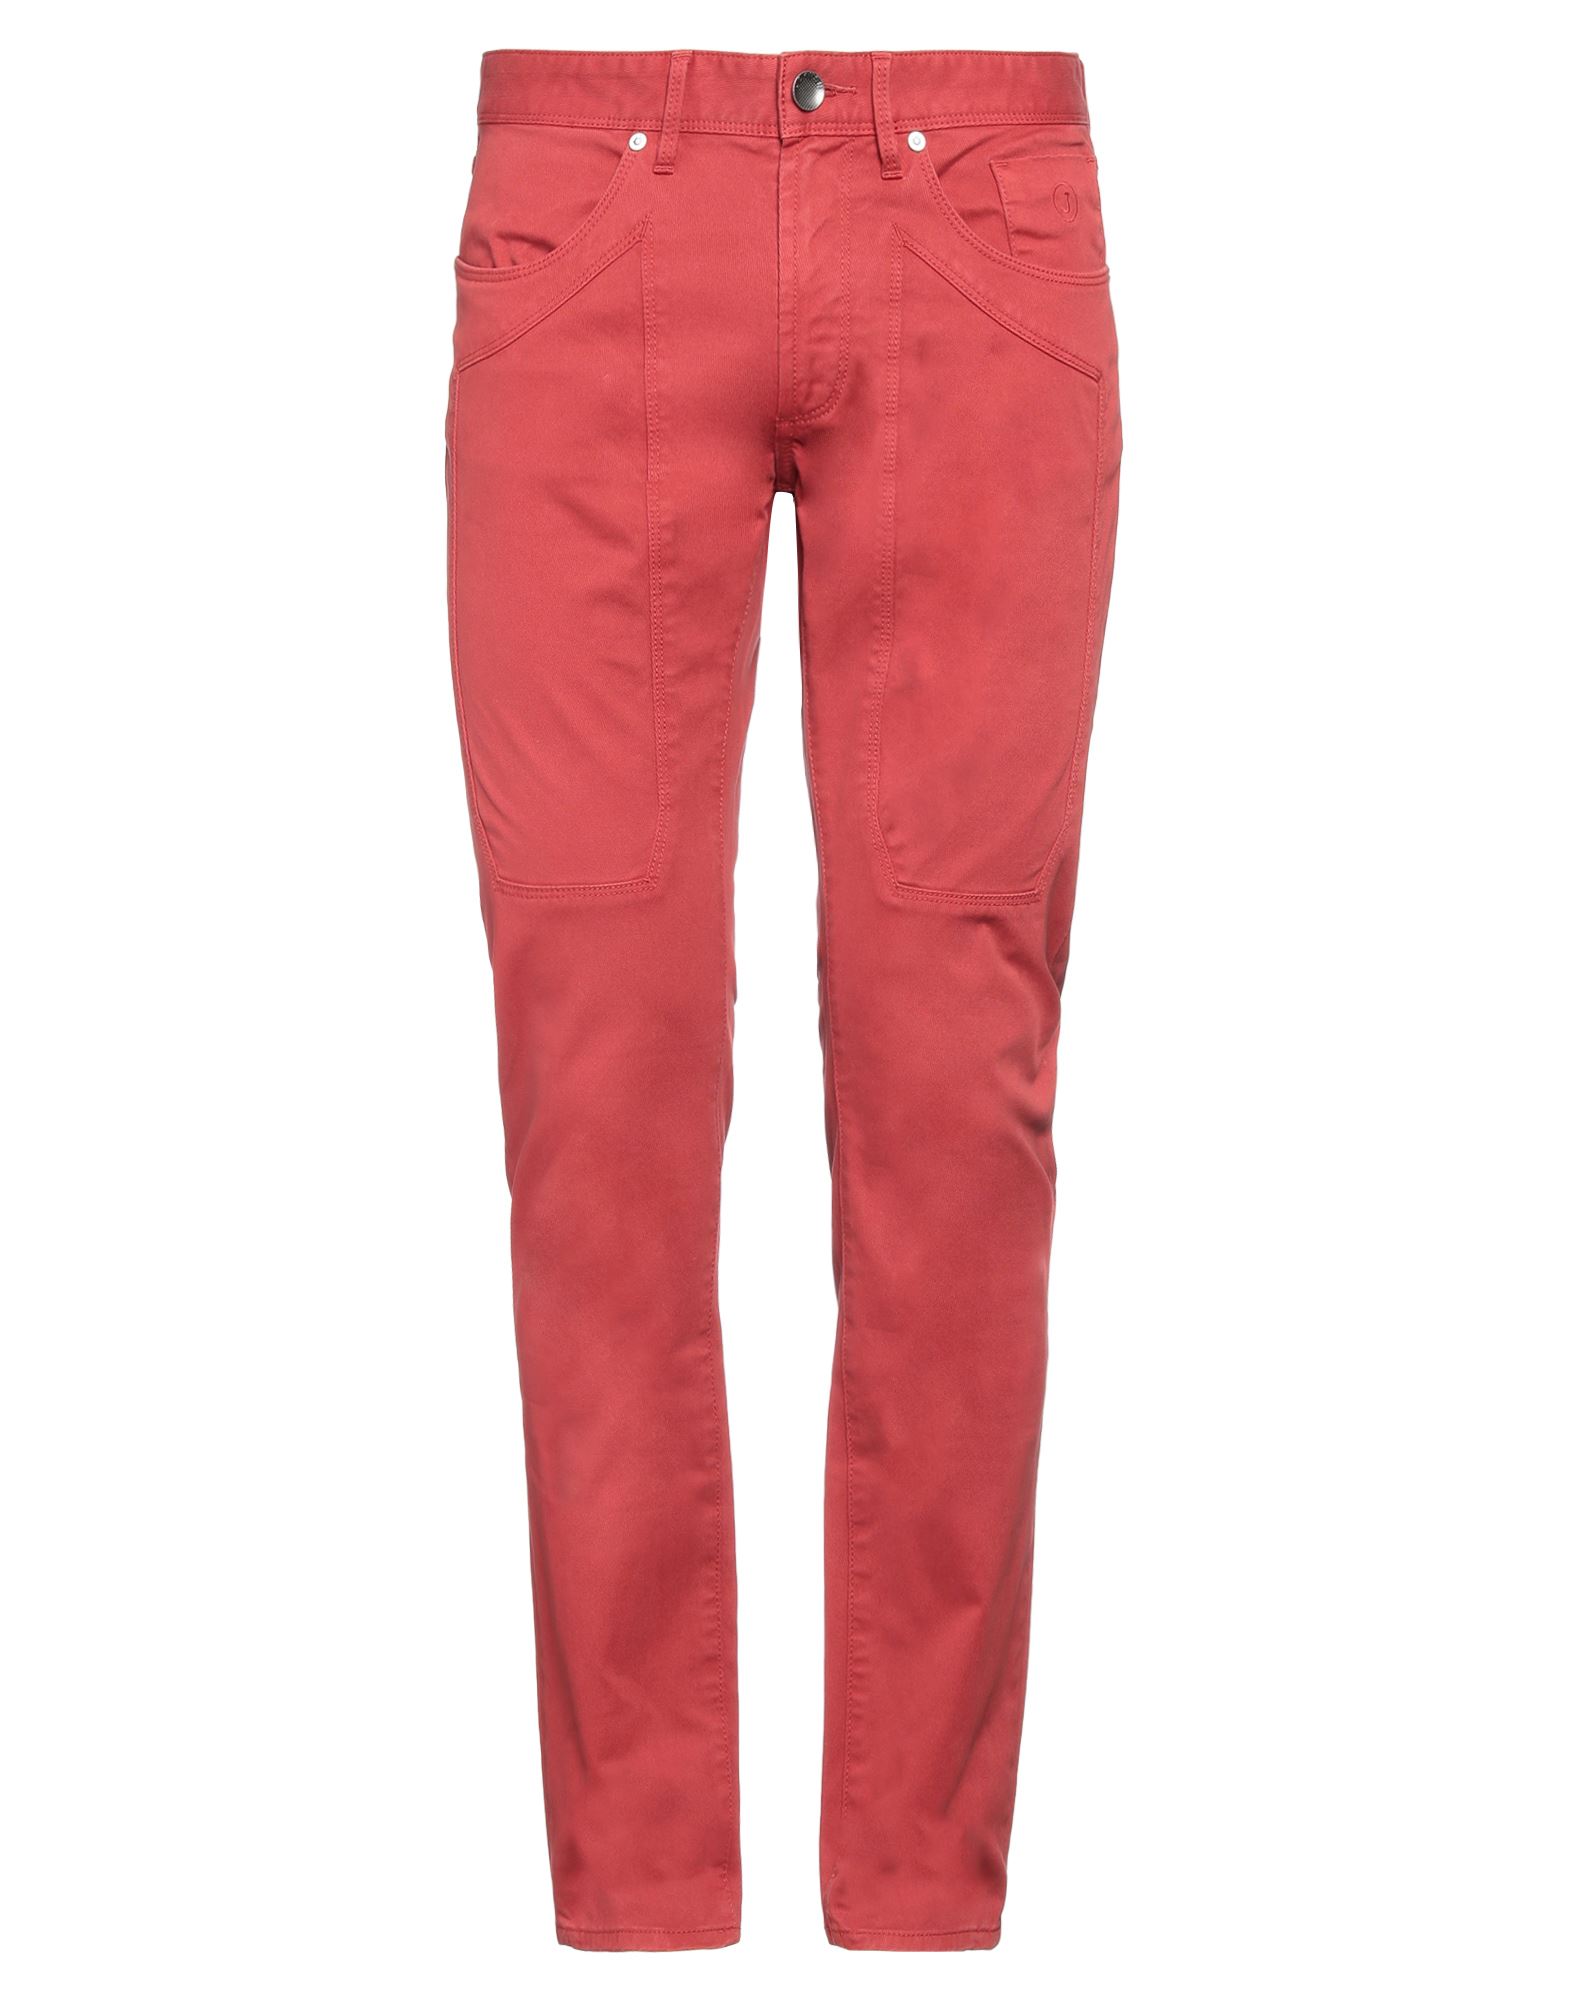 Jeckerson Pants In Tomato Red